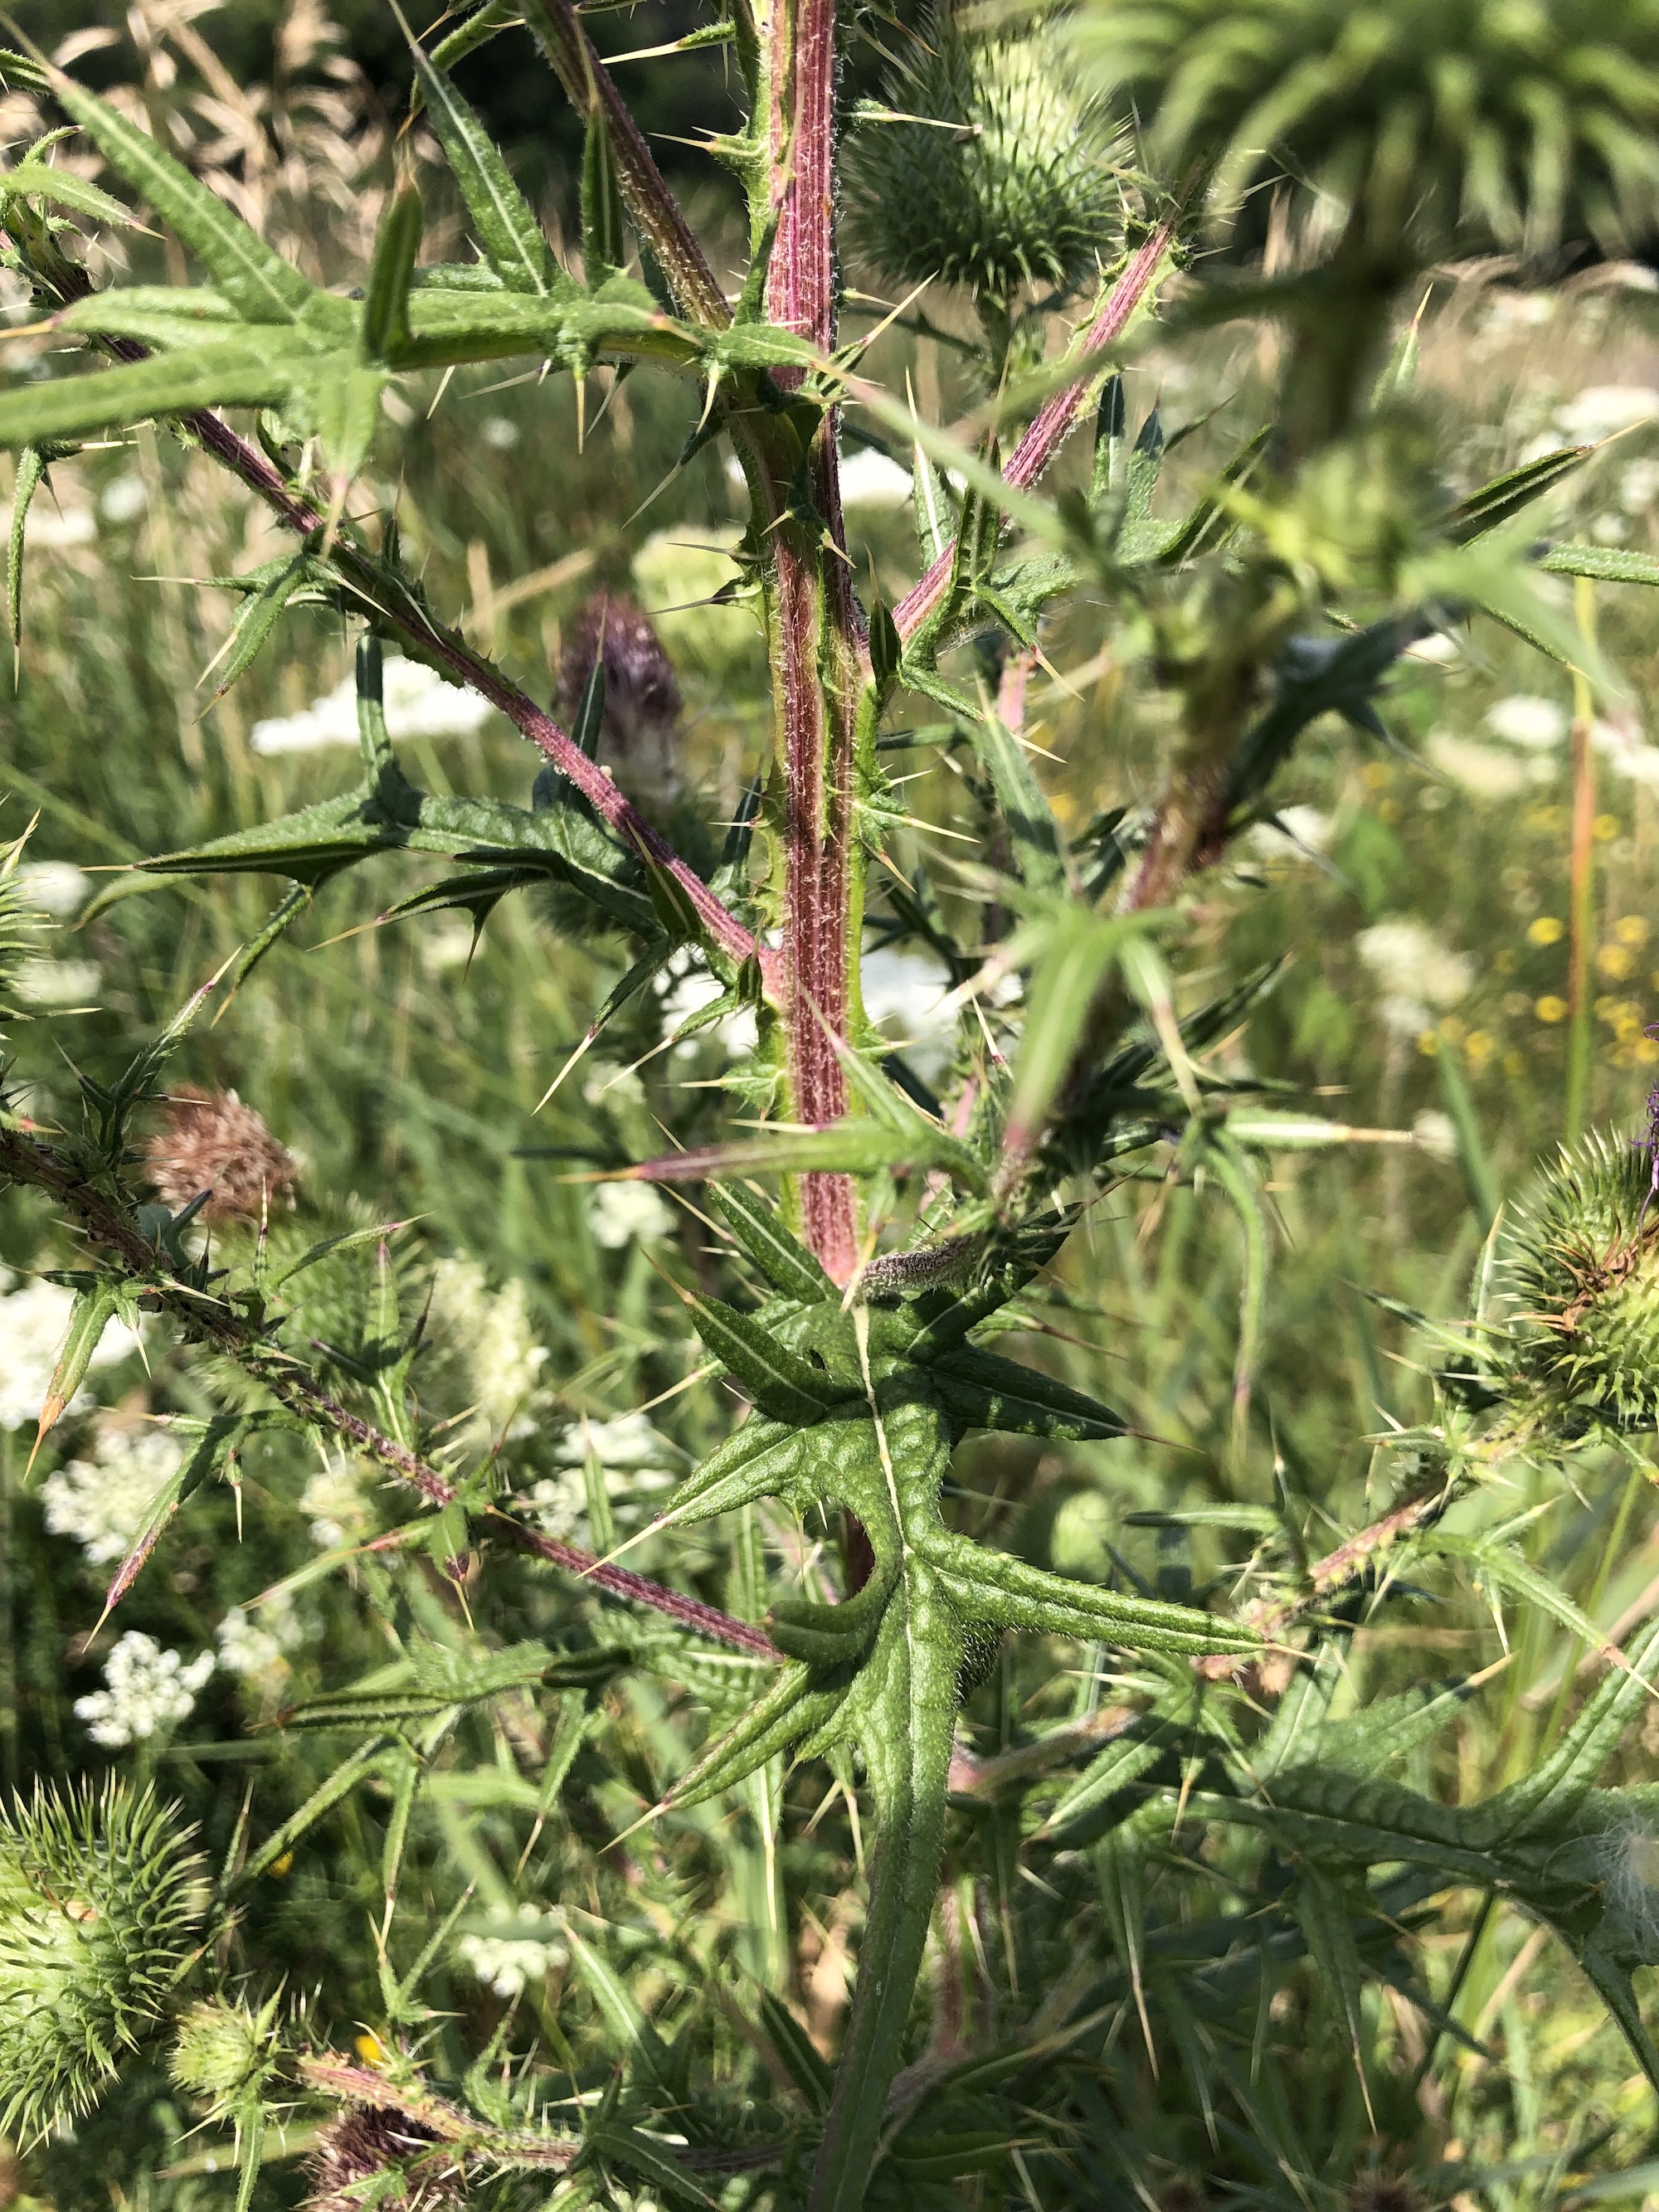 Bull Thistle stalk and leaves growing in field near the Westside Community Farmer's Market on University Row in Madison, Wisconsin on July 30, 2022.